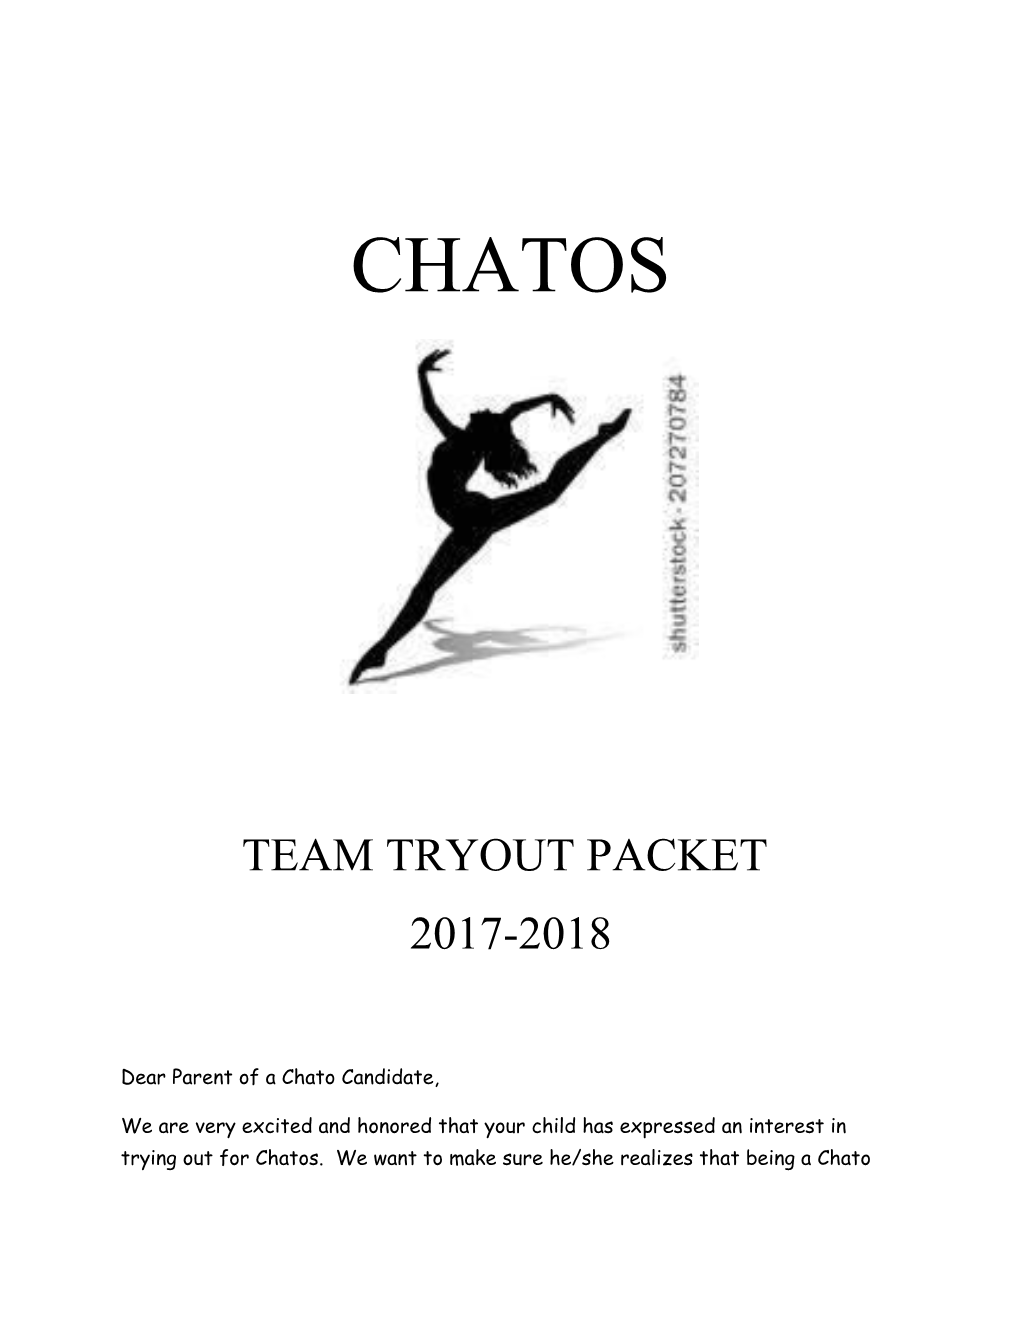 Dear Parent of a Chato Candidate